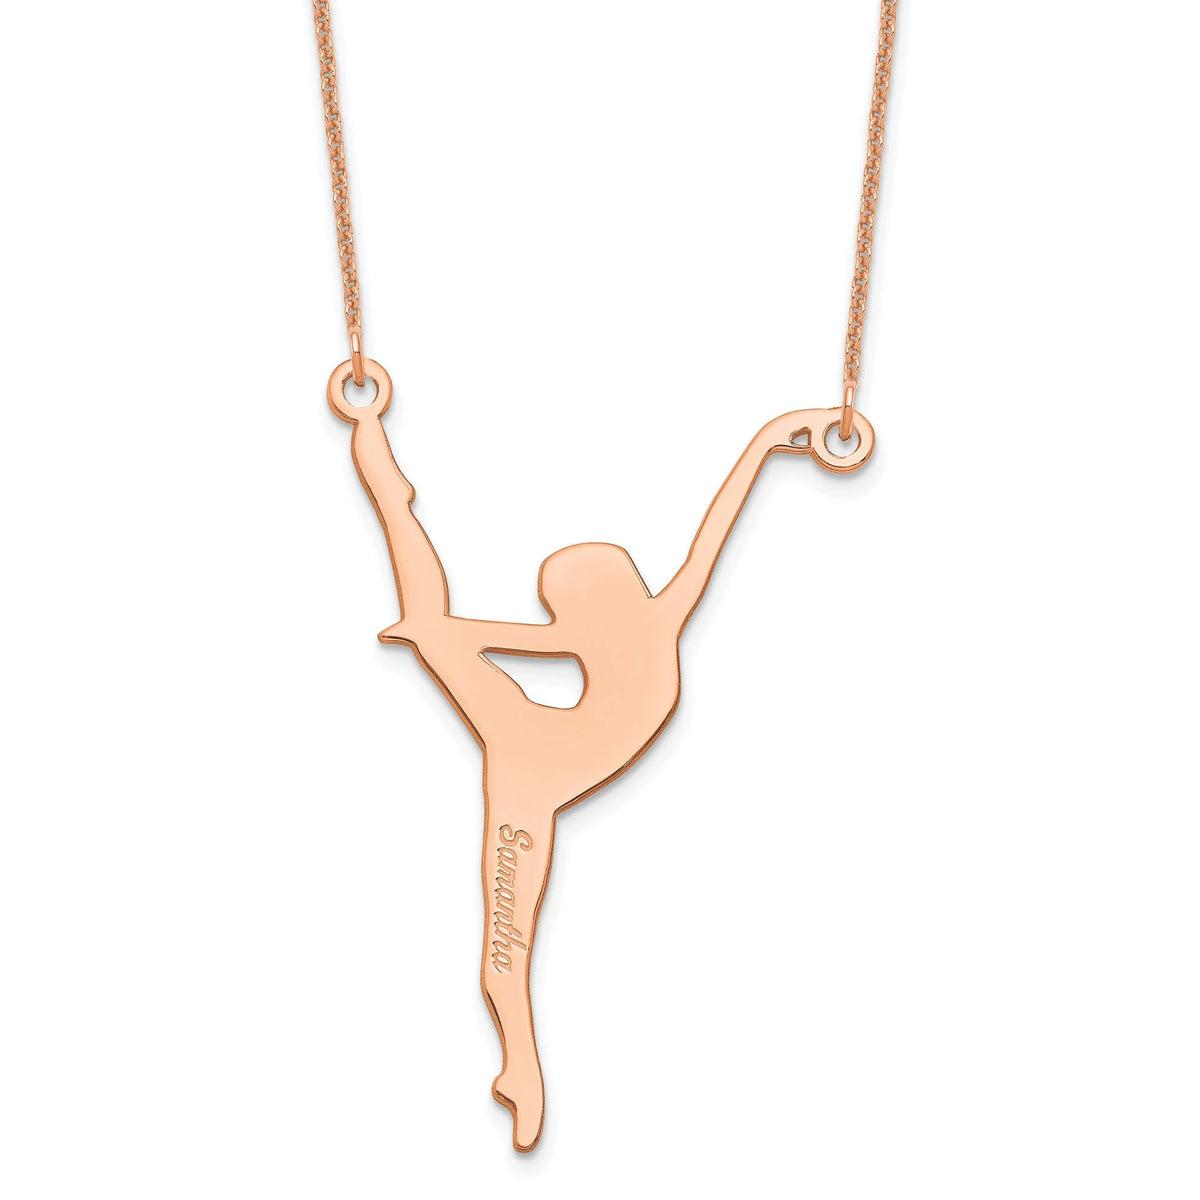 Personalized Ballet Name Necklace in Sterling Silver, 10k, or 14k Gold Chain Length 16, 18, & 20 Inches (1.5 inches Tall) Dancer Necklace